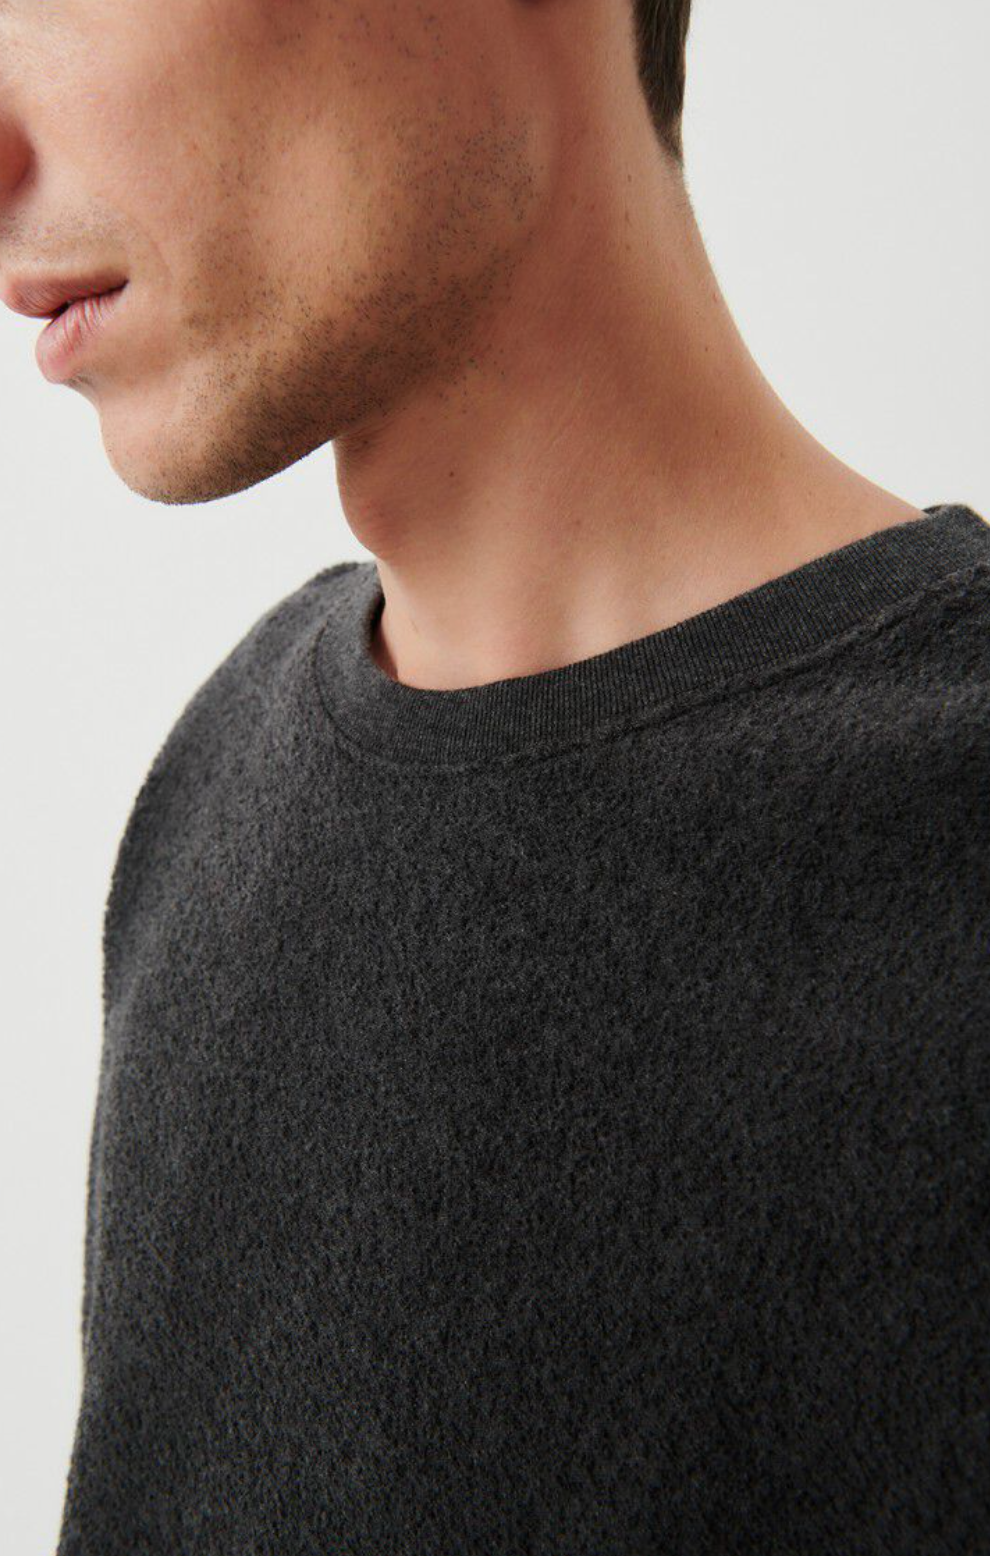 A close up neckline detail image of a male model standing at an angle wearing the bobypark tee shirt in anthracite